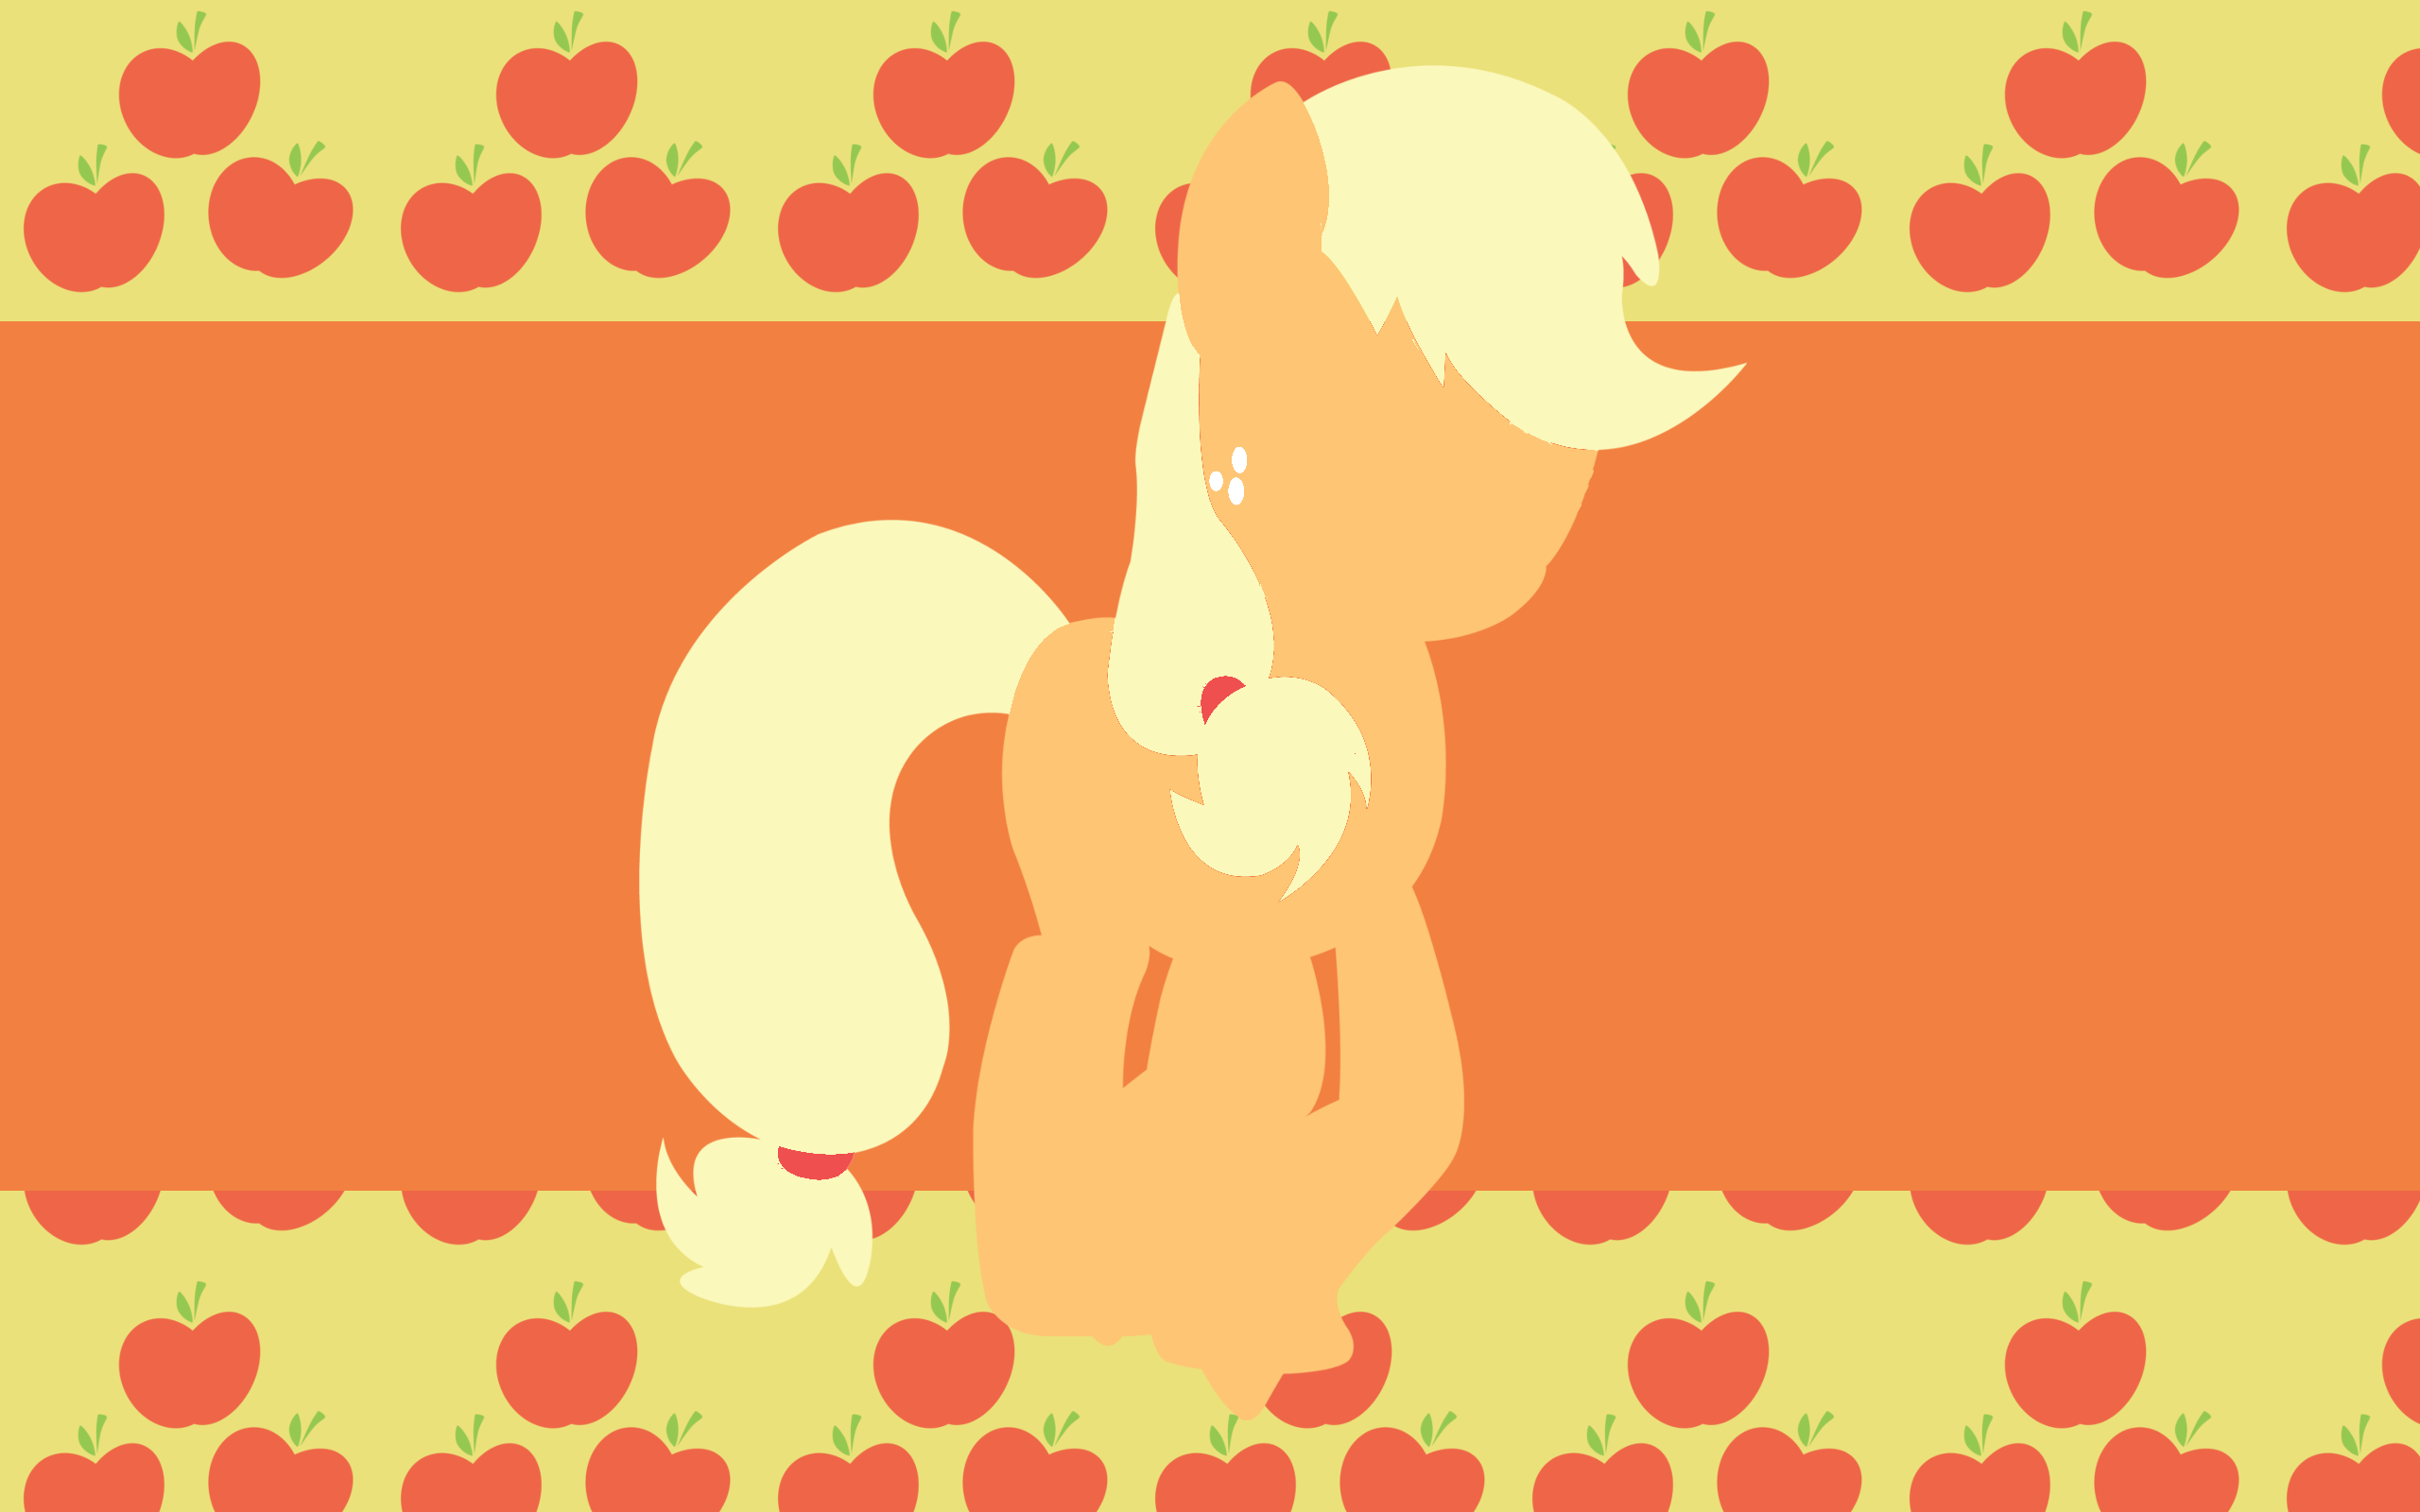 Amazing Applejack WP by AliceHumanSacrifice0, midnite99 and ooklah